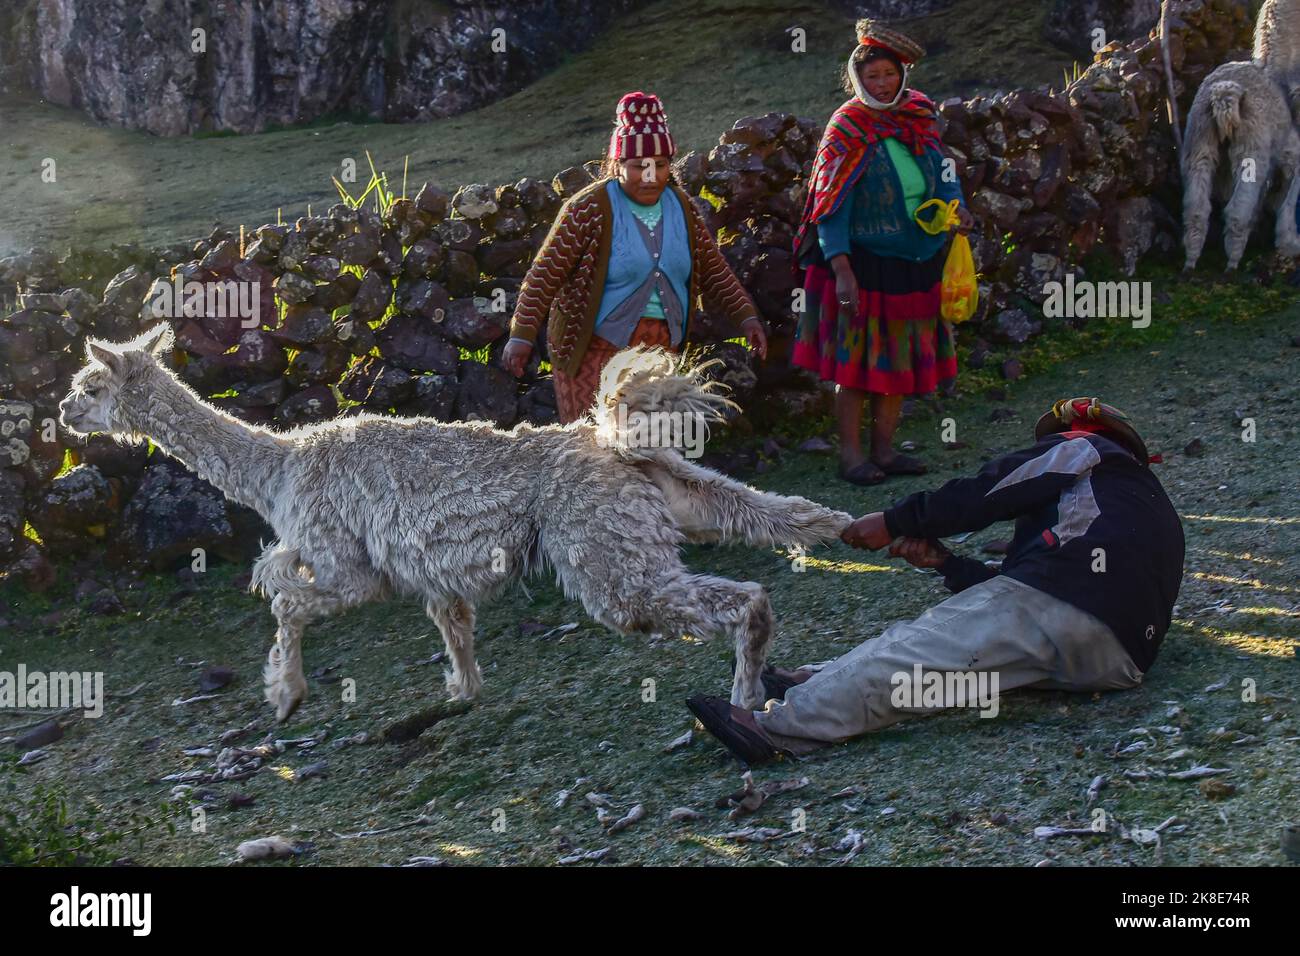 Indians catching an alpaca (Vicugna pacos) for slaughter, Andes, near Cusco, Peru, South America Stock Photo